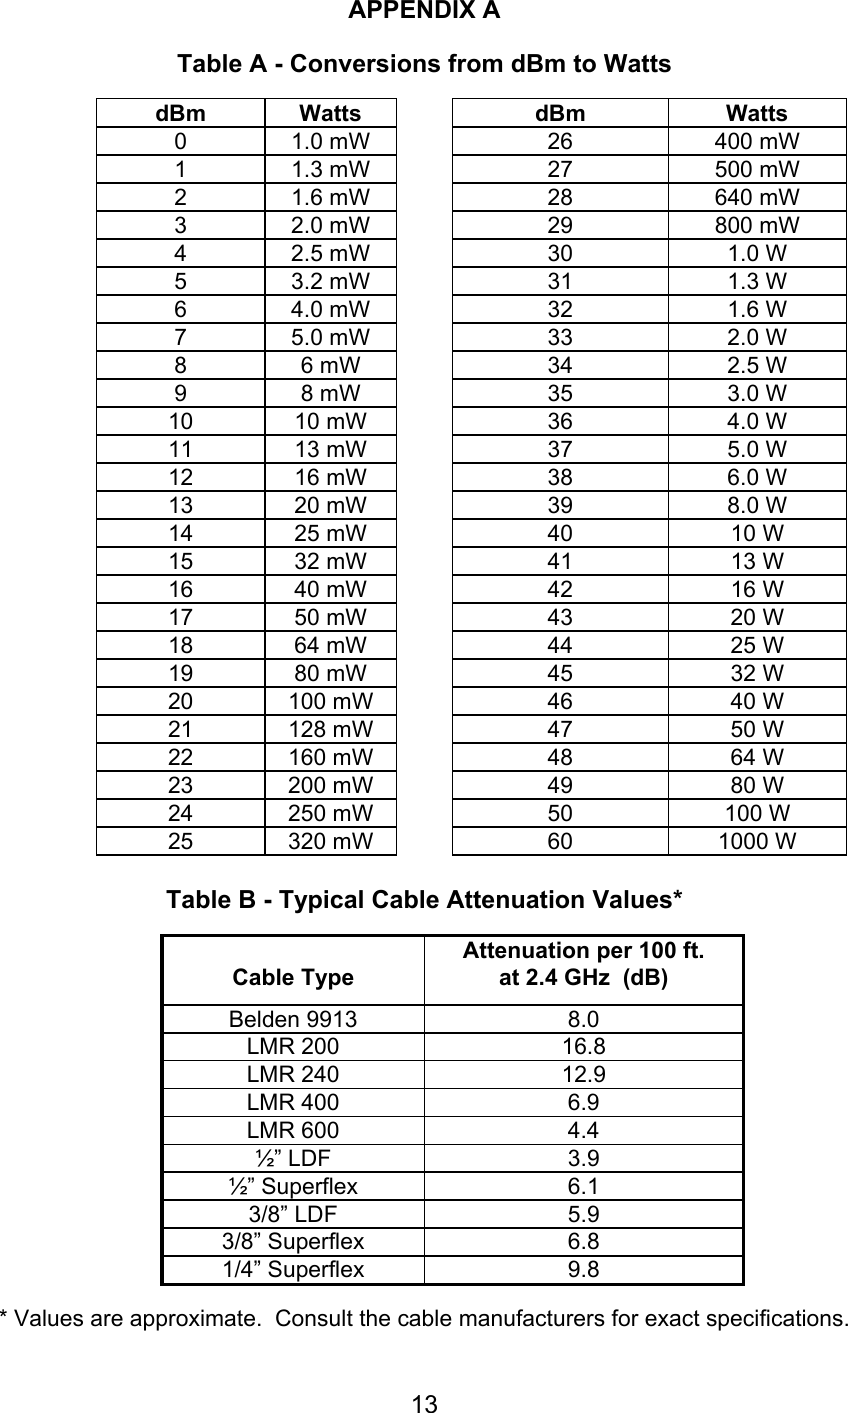  13APPENDIX A  Table A - Conversions from dBm to Watts  dBm Watts  dBm Watts 0  1.0 mW    26  400 mW 1  1.3 mW    27  500 mW 2  1.6 mW    28  640 mW 3  2.0 mW    29  800 mW 4  2.5 mW    30  1.0 W 5  3.2 mW    31  1.3 W 6  4.0 mW    32  1.6 W 7  5.0 mW    33  2.0 W 8  6 mW    34  2.5 W 9  8 mW    35  3.0 W 10  10 mW    36  4.0 W 11  13 mW    37  5.0 W 12  16 mW    38  6.0 W 13  20 mW    39  8.0 W 14  25 mW    40  10 W 15  32 mW    41  13 W 16  40 mW    42  16 W 17  50 mW    43  20 W 18  64 mW    44  25 W 19  80 mW    45  32 W 20  100 mW    46  40 W 21  128 mW    47  50 W 22  160 mW    48  64 W 23  200 mW    49  80 W 24  250 mW    50  100 W 25  320 mW    60  1000 W  Table B - Typical Cable Attenuation Values*    Attenuation per 100 ft.  Cable Type at 2.4 GHz  (dB) Belden 9913  8.0 LMR 200  16.8 LMR 240  12.9 LMR 400  6.9 LMR 600  4.4 ½” LDF  3.9 ½” Superflex  6.1 3/8” LDF  5.9 3/8” Superflex  6.8 1/4” Superflex  9.8  * Values are approximate.  Consult the cable manufacturers for exact specifications. 